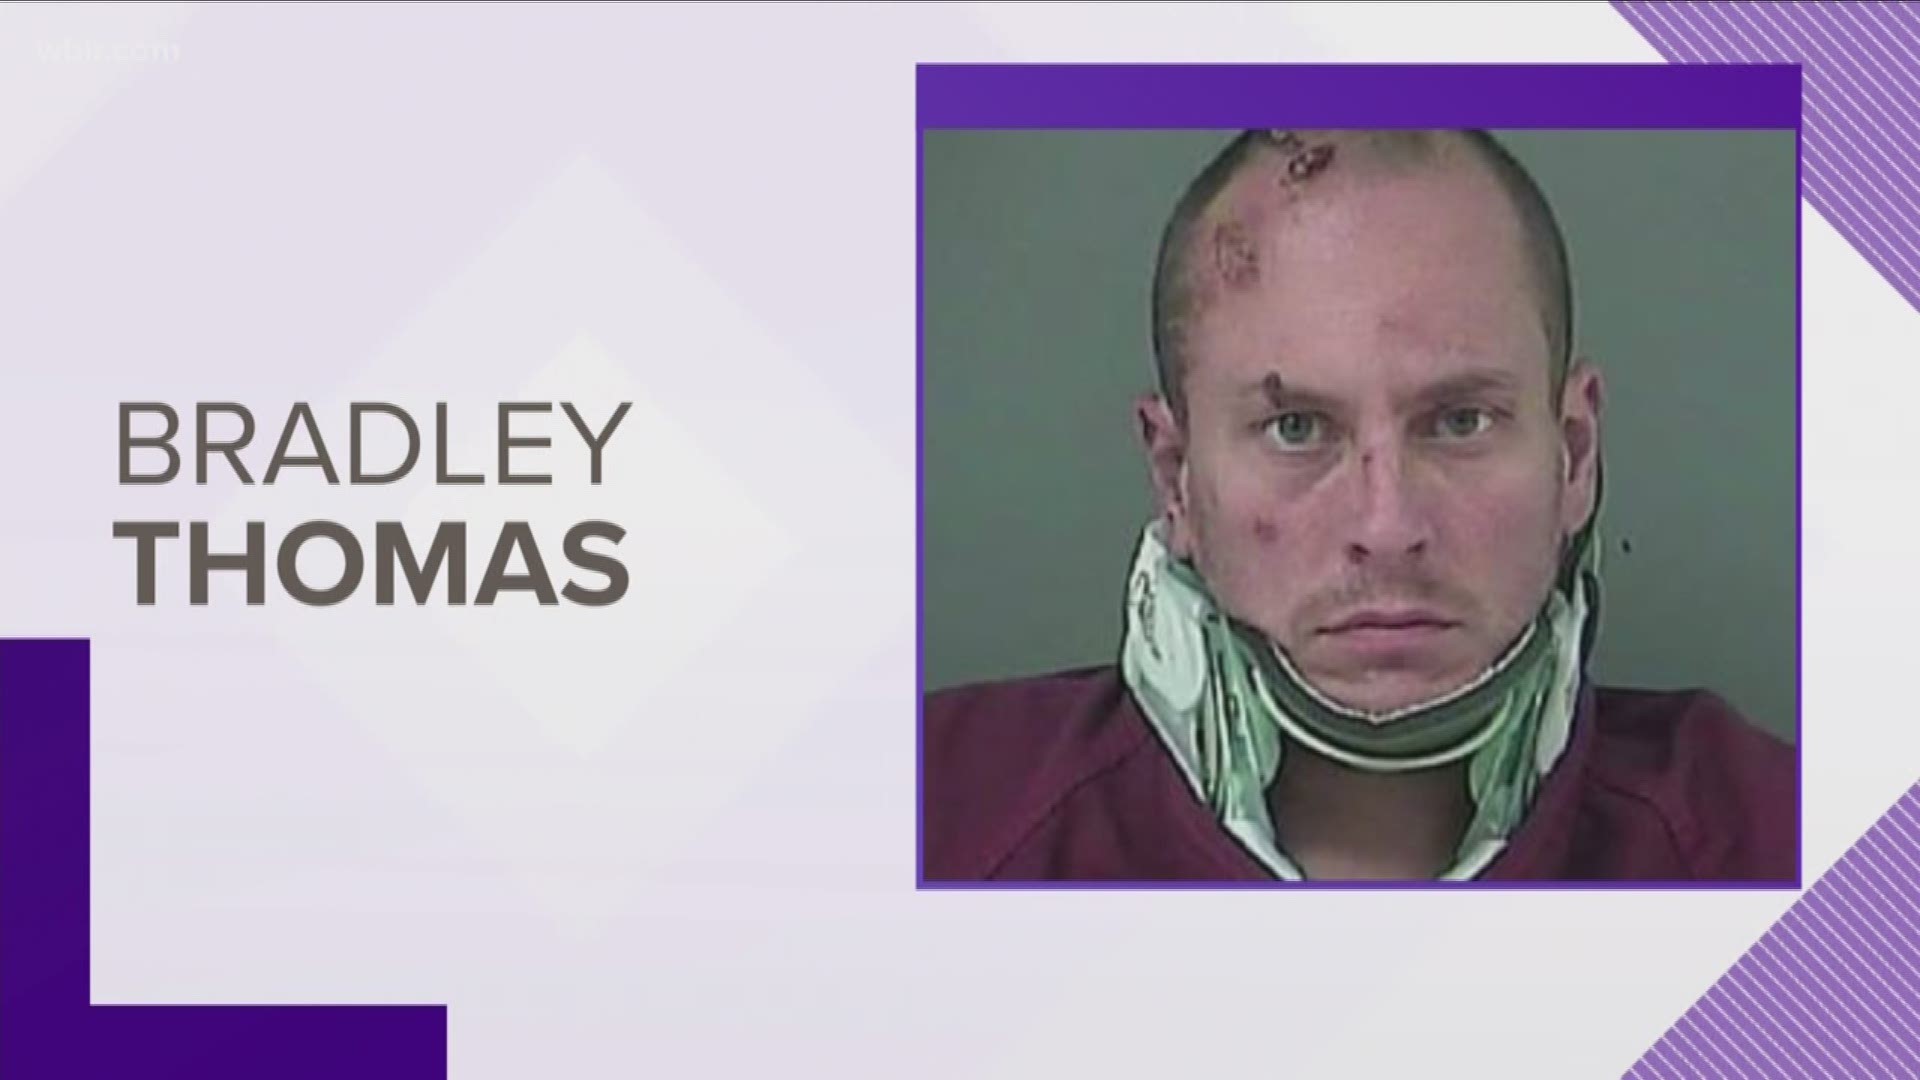 Bradley Allan Thomas was taken into custody after being released from UT Medical Center Thursday afternoon.